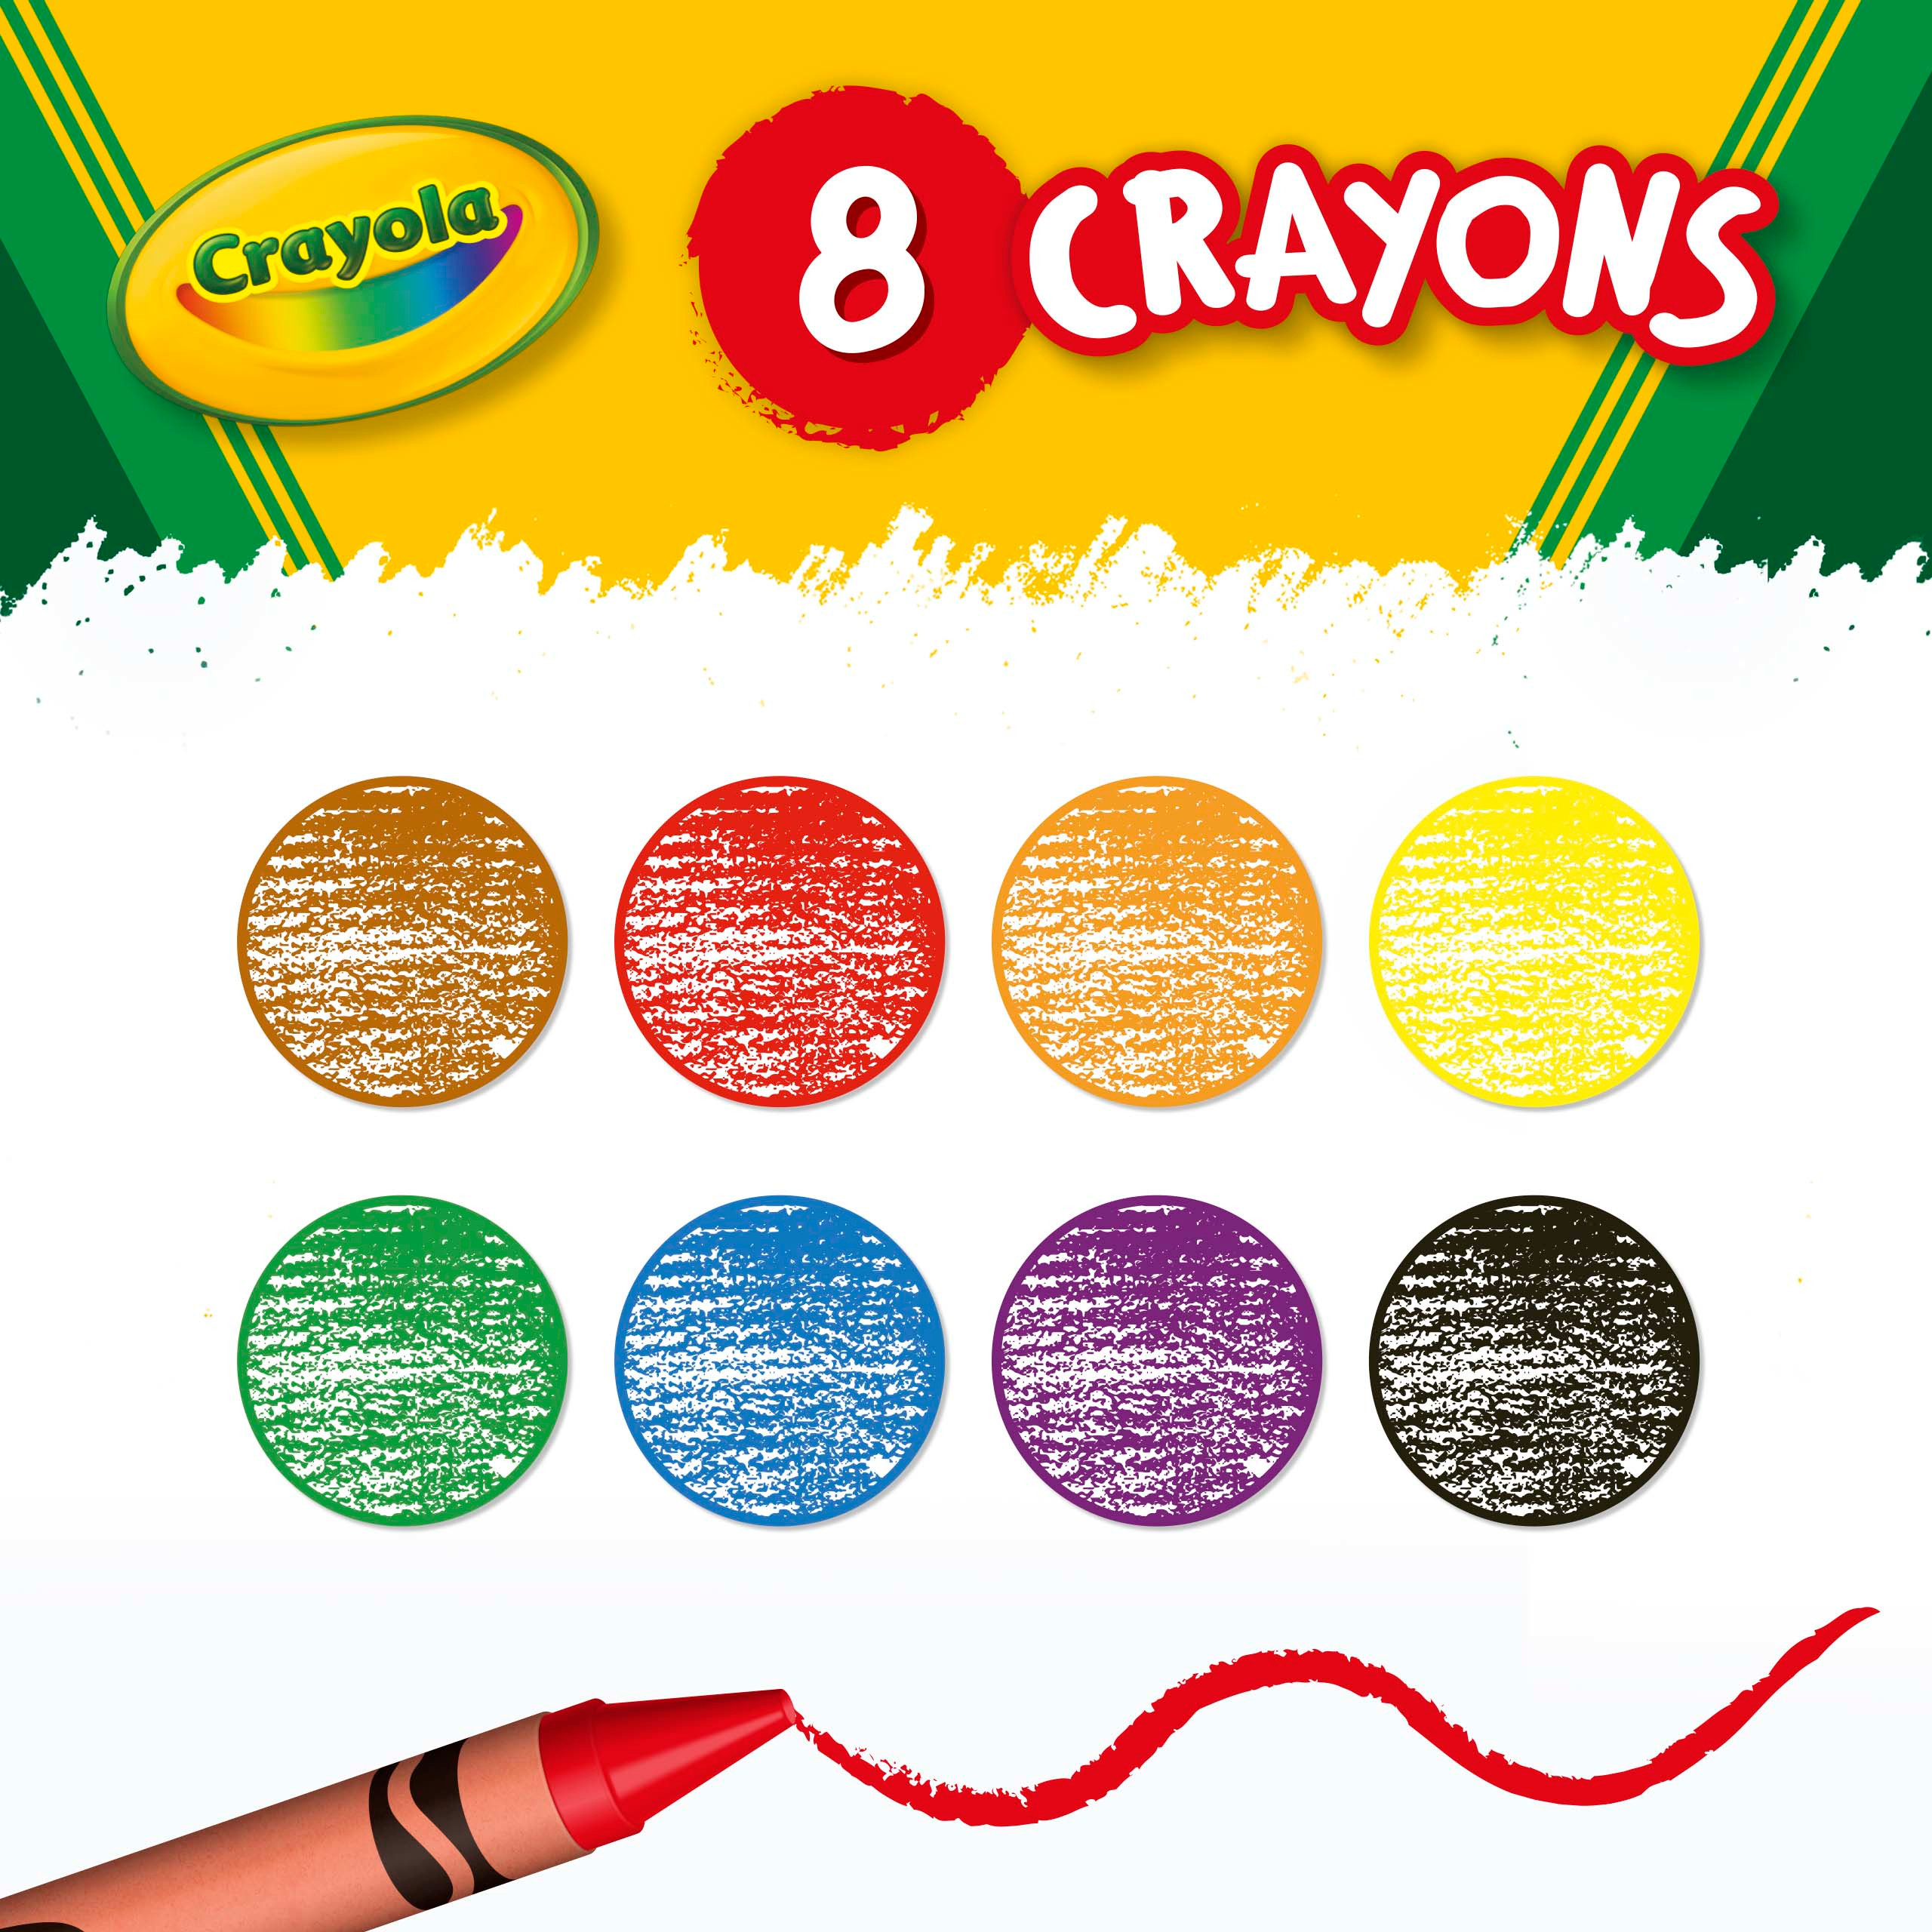 Crayola Classic Crayons, Back to School Supplies for Kids, 8 Ct, Art Supplies - image 5 of 10